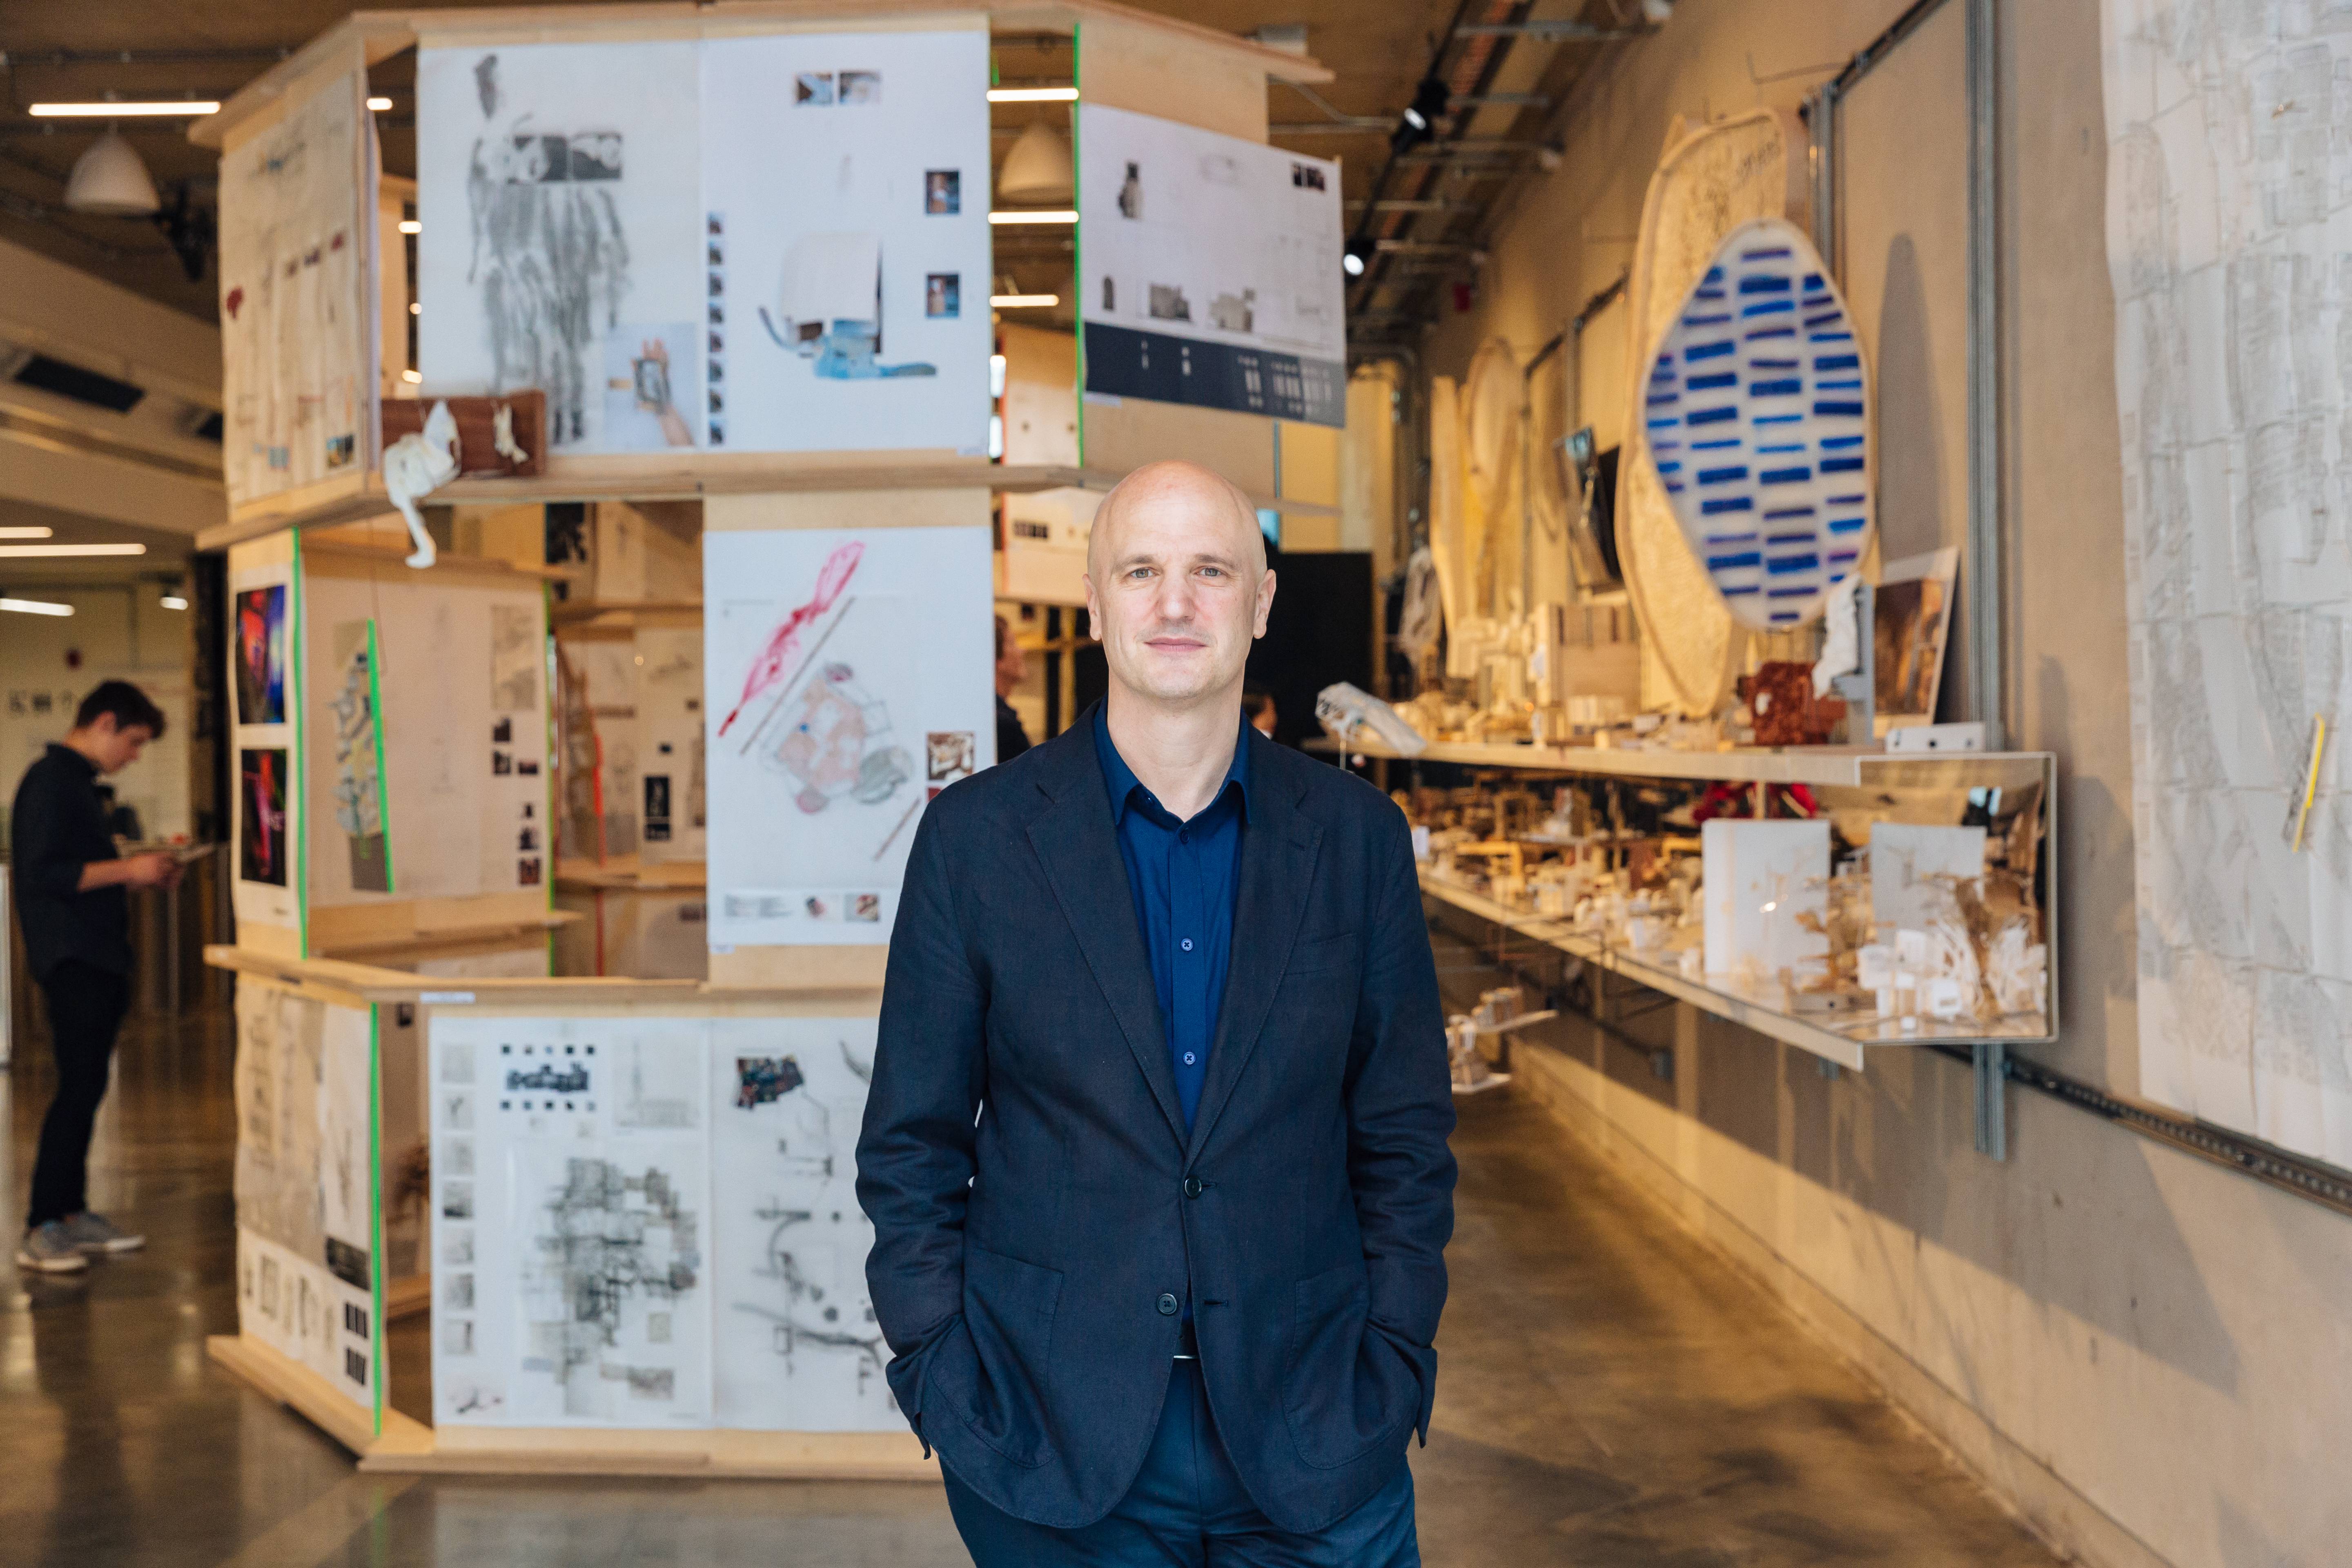 A portrait of Christoph Lindner taken at The Bartlett School of Architecture.